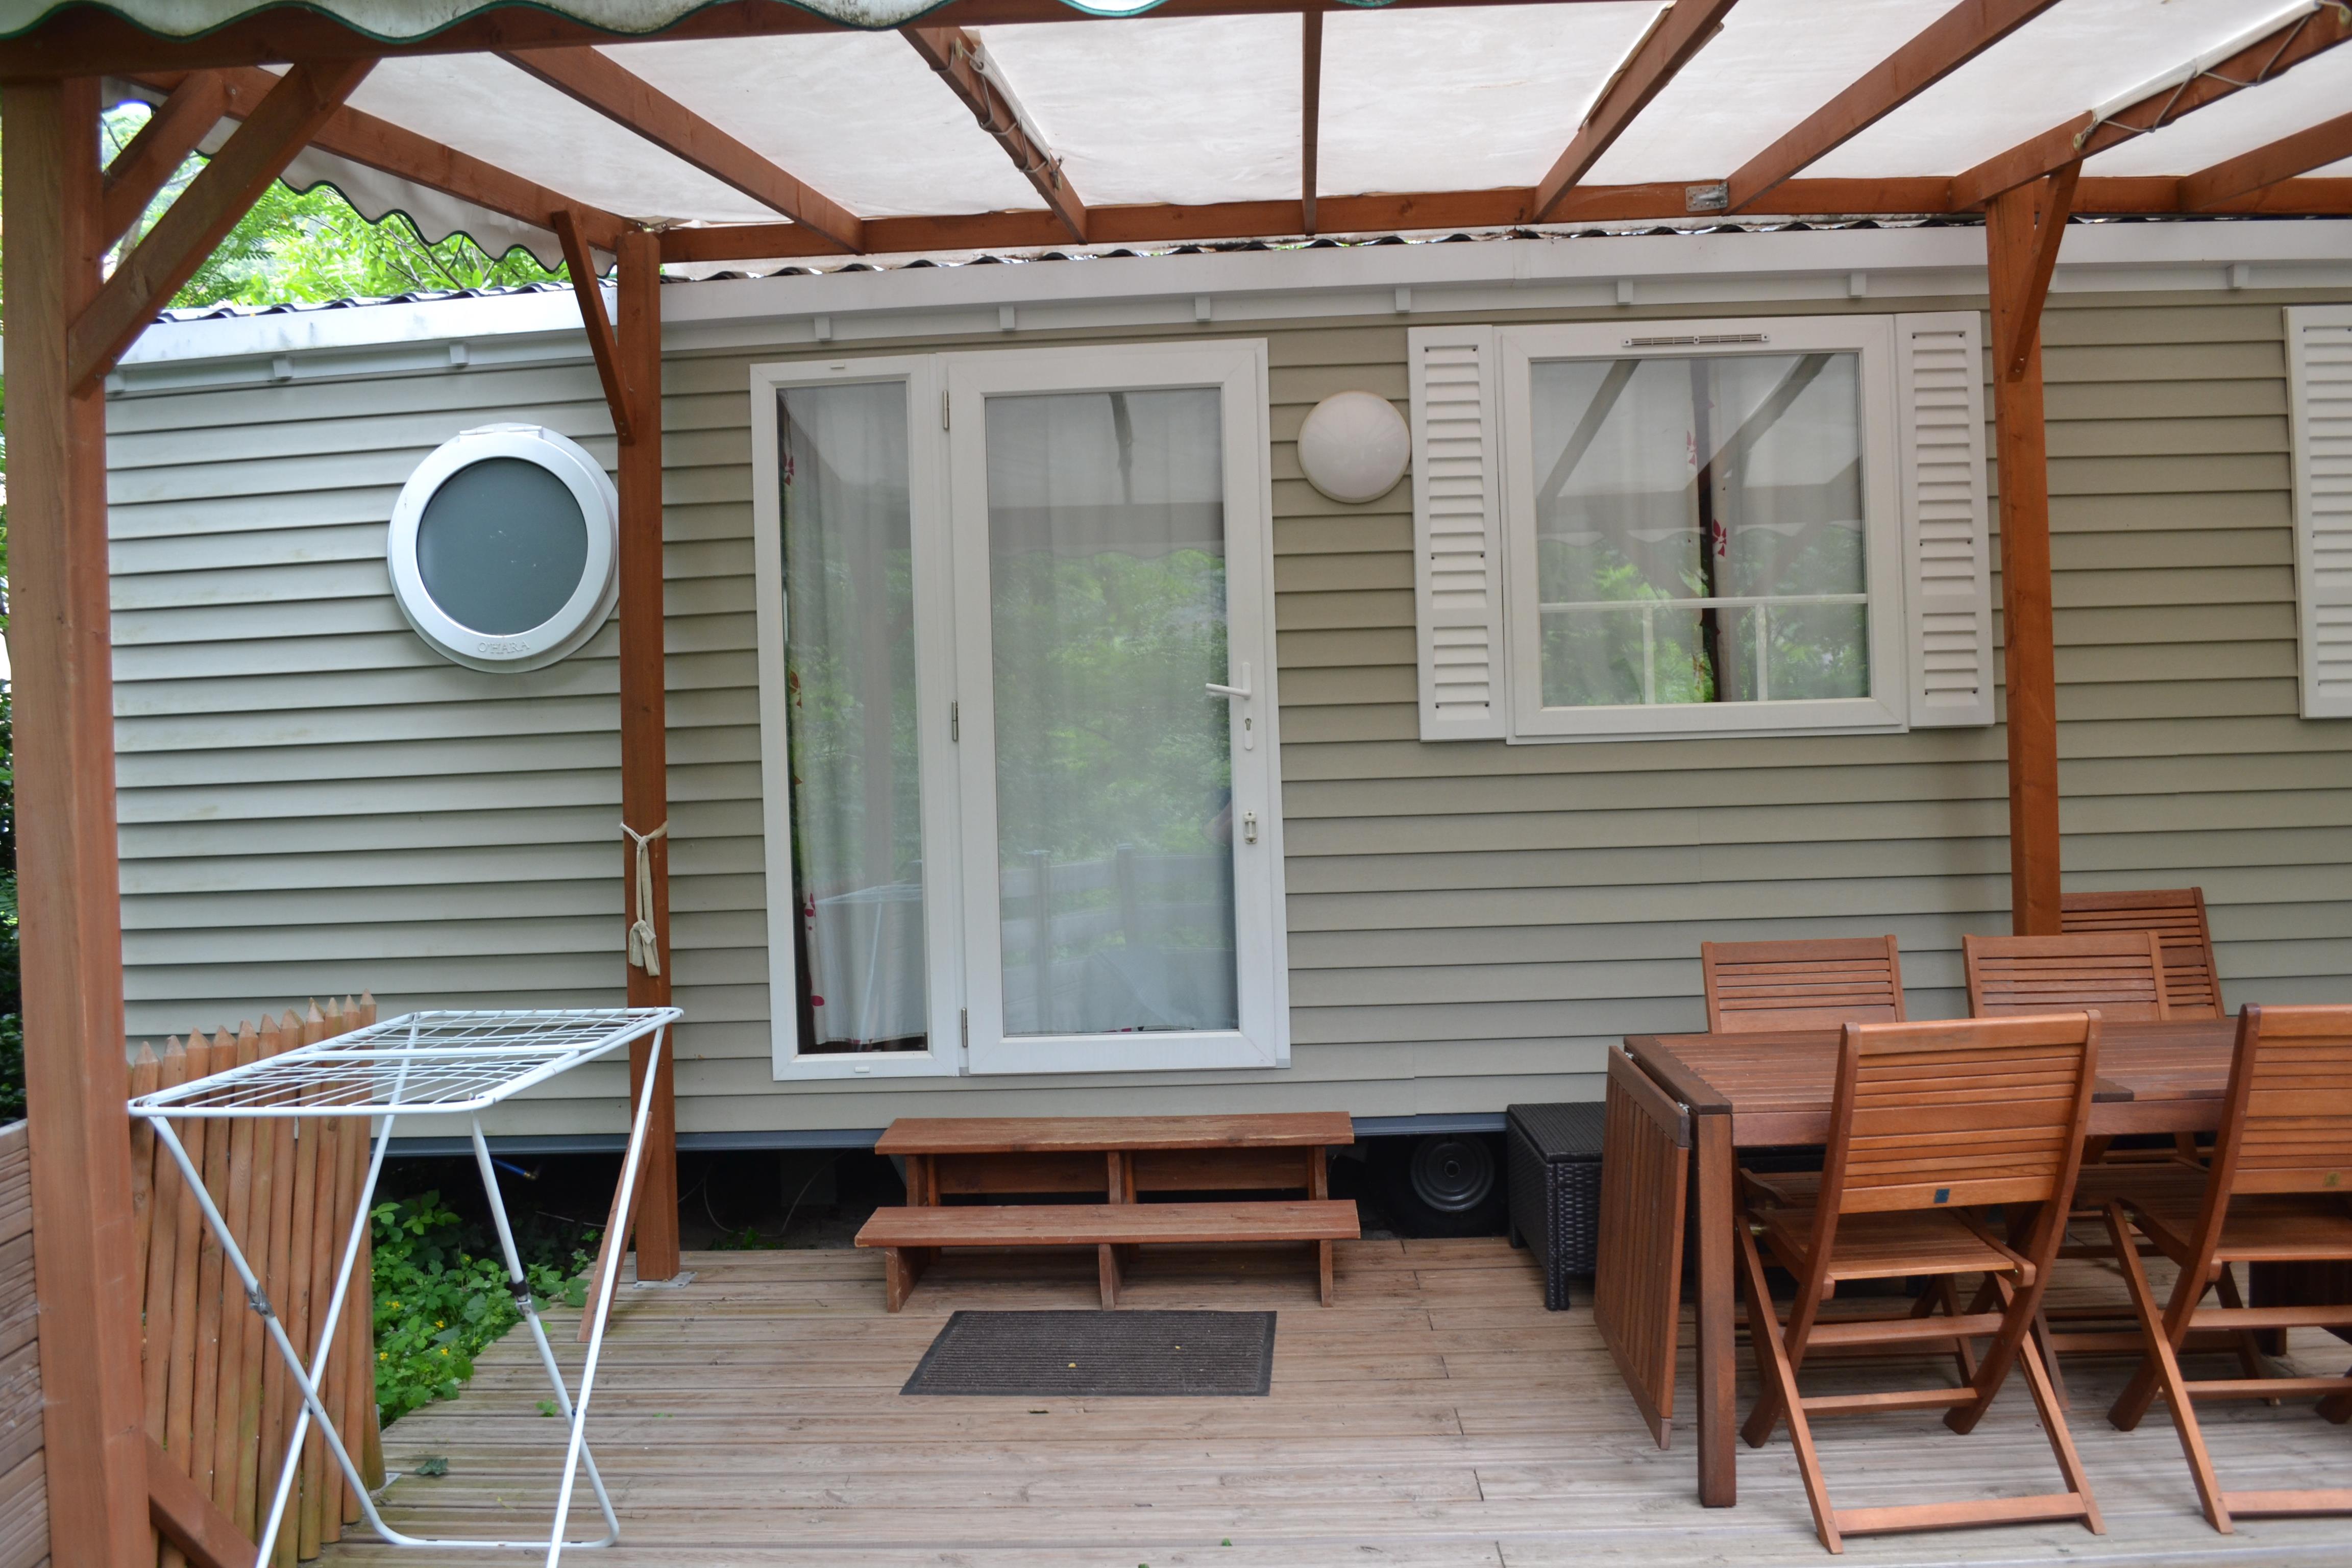 Accommodation - Mobilhome Sunday / 3 Bedrooms + Sheltered Terrace - Camping Le Barutel